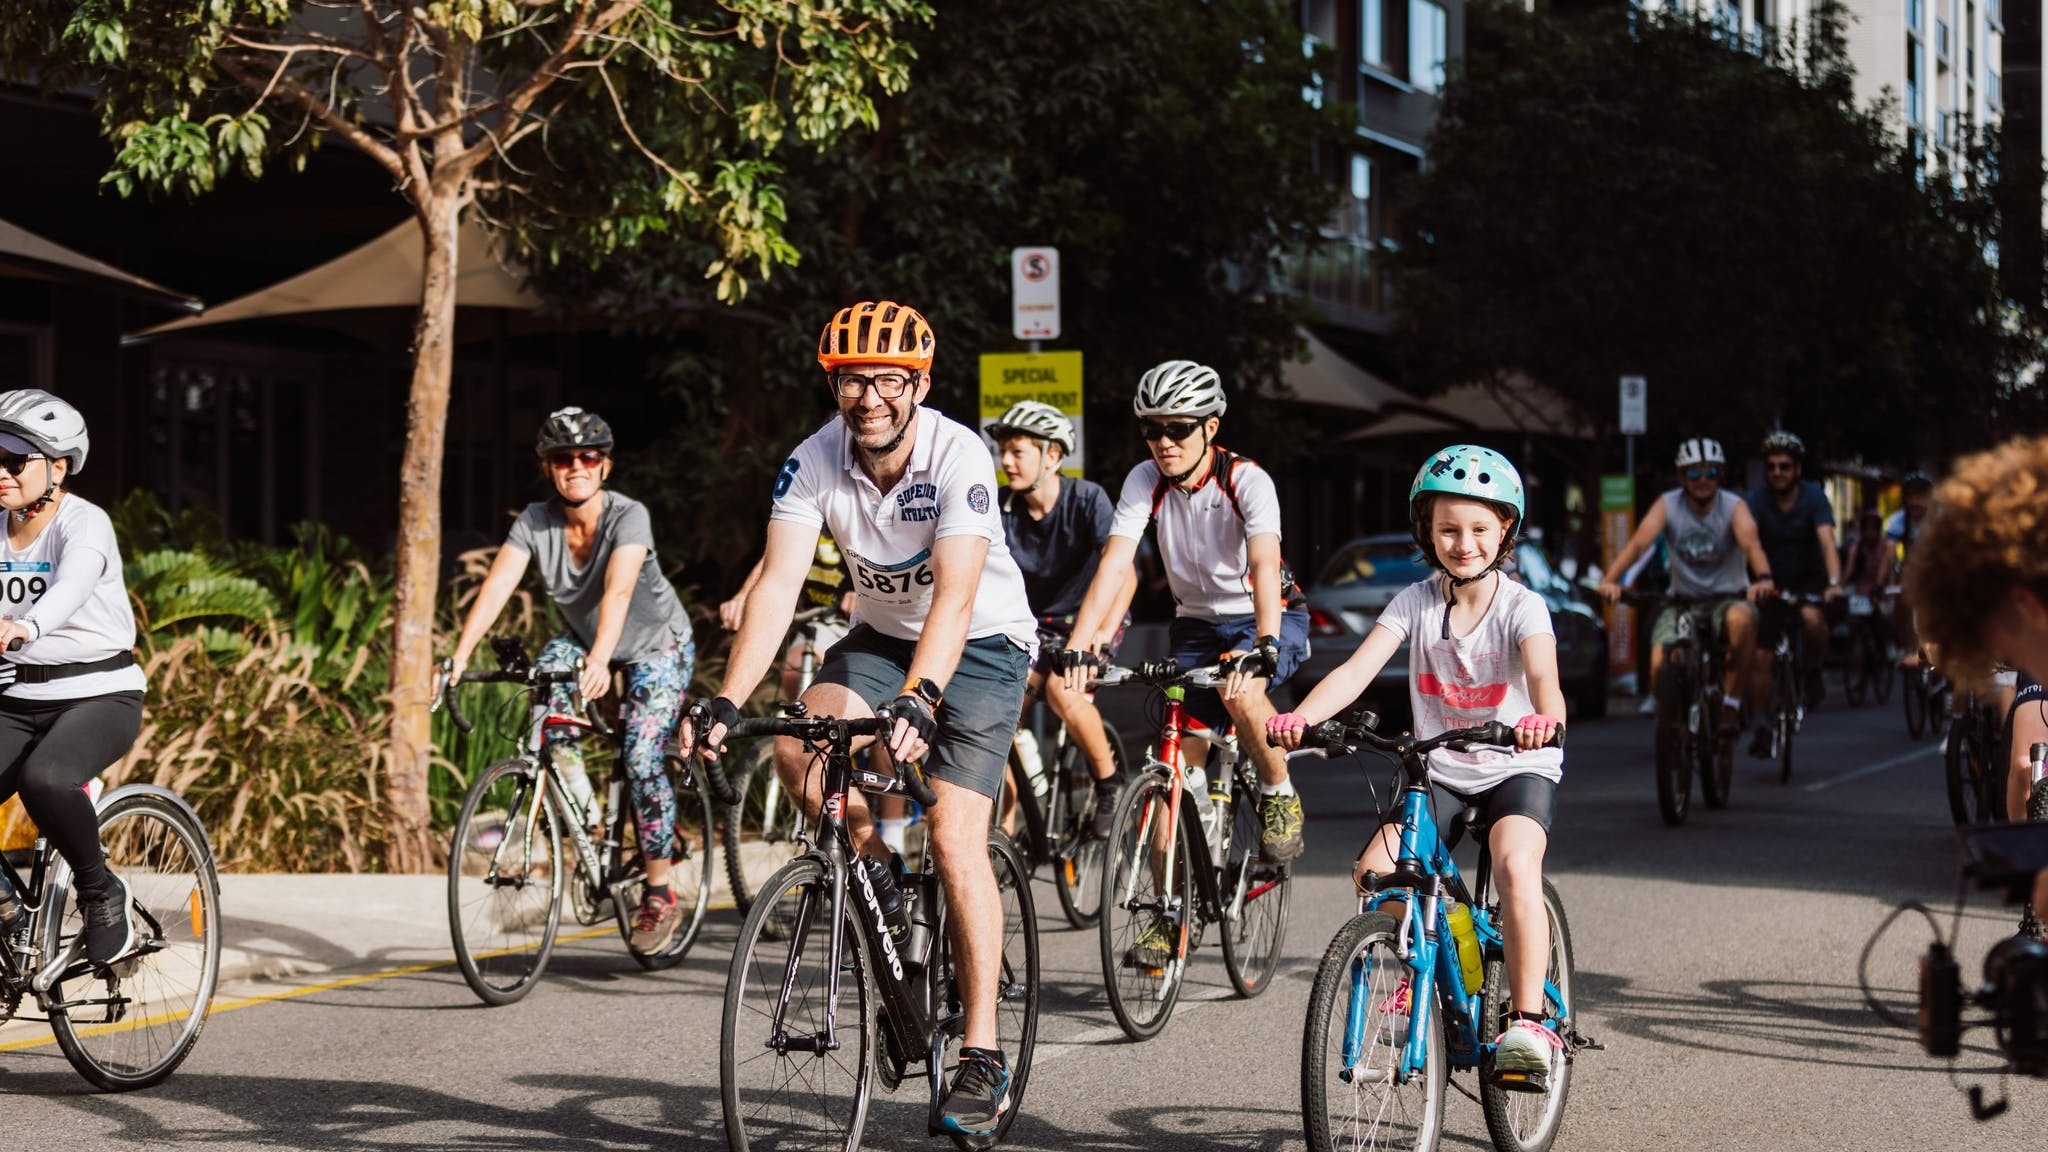 Participants in the Brisbane Cycling Festival